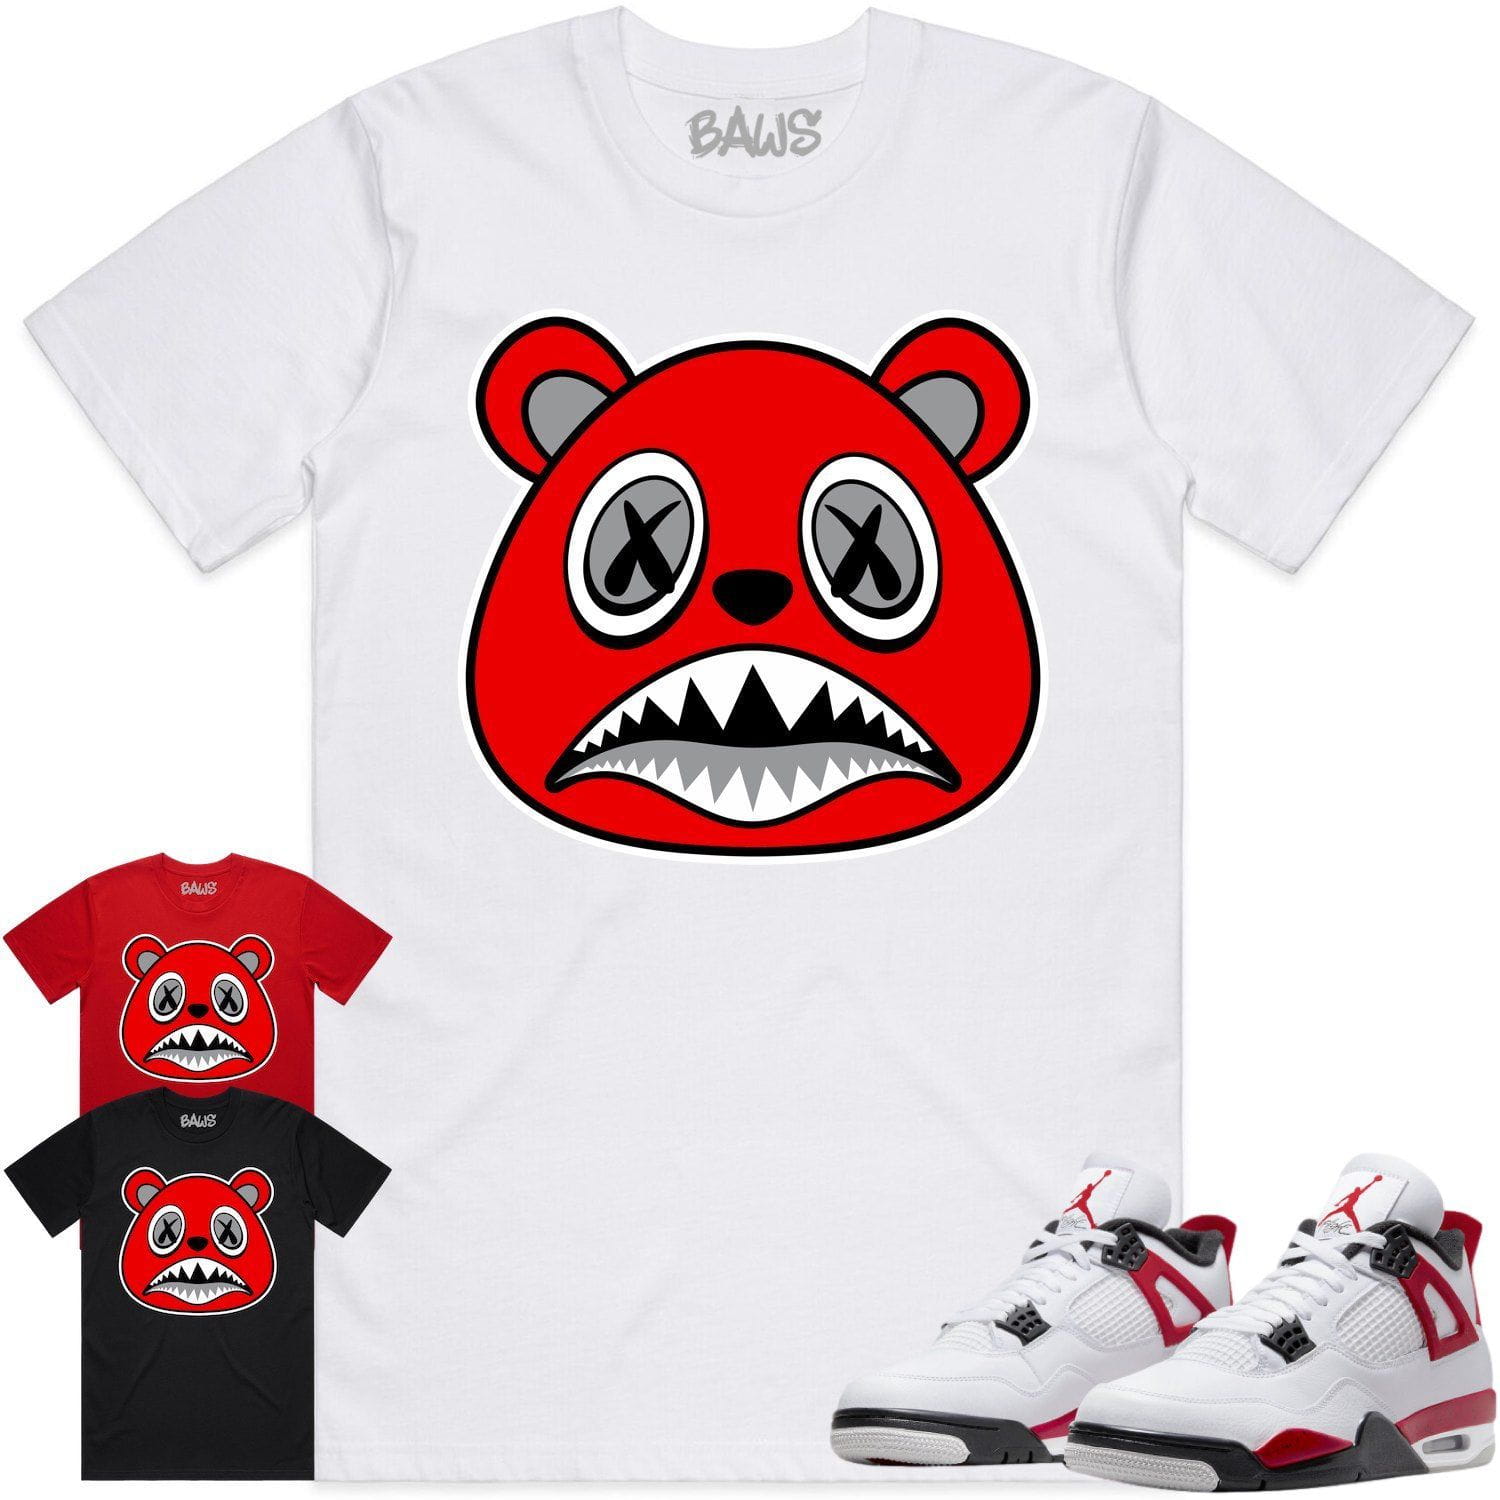 Red Cement 4s Shirt - Jordan Retro 4 Red Cement Shirts - Angry Baws